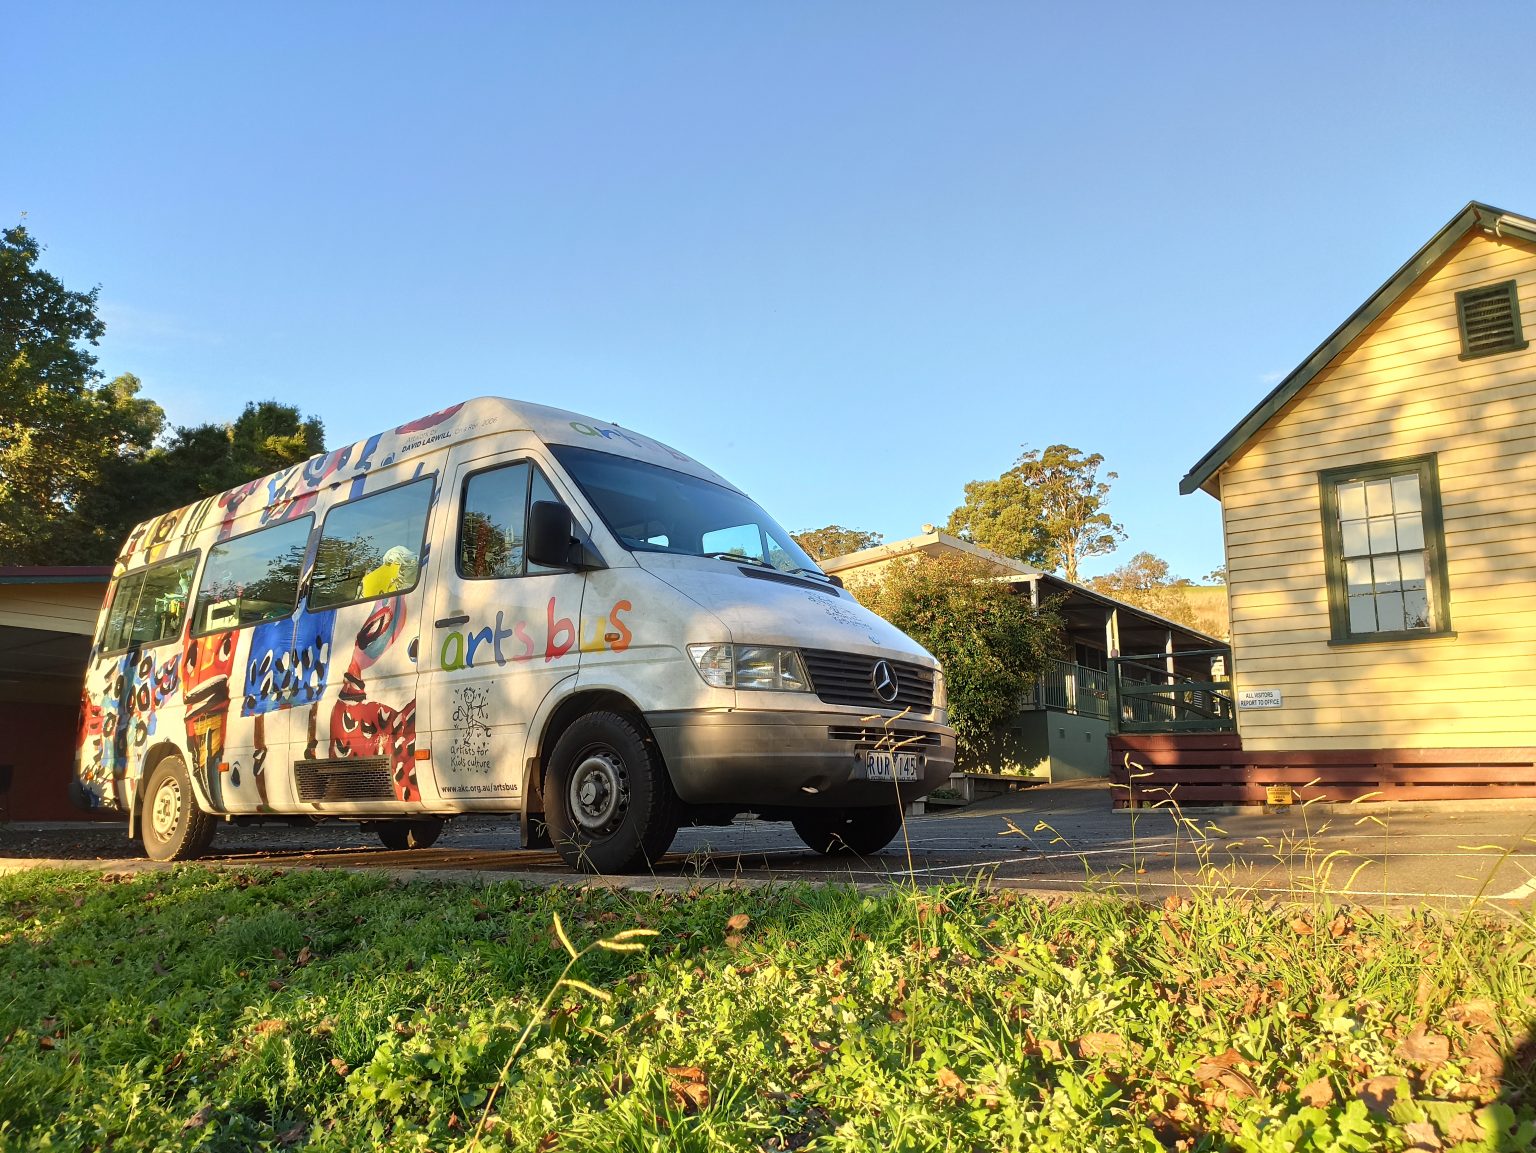 Photo of the artsbus in regional Victoria with a blue sky